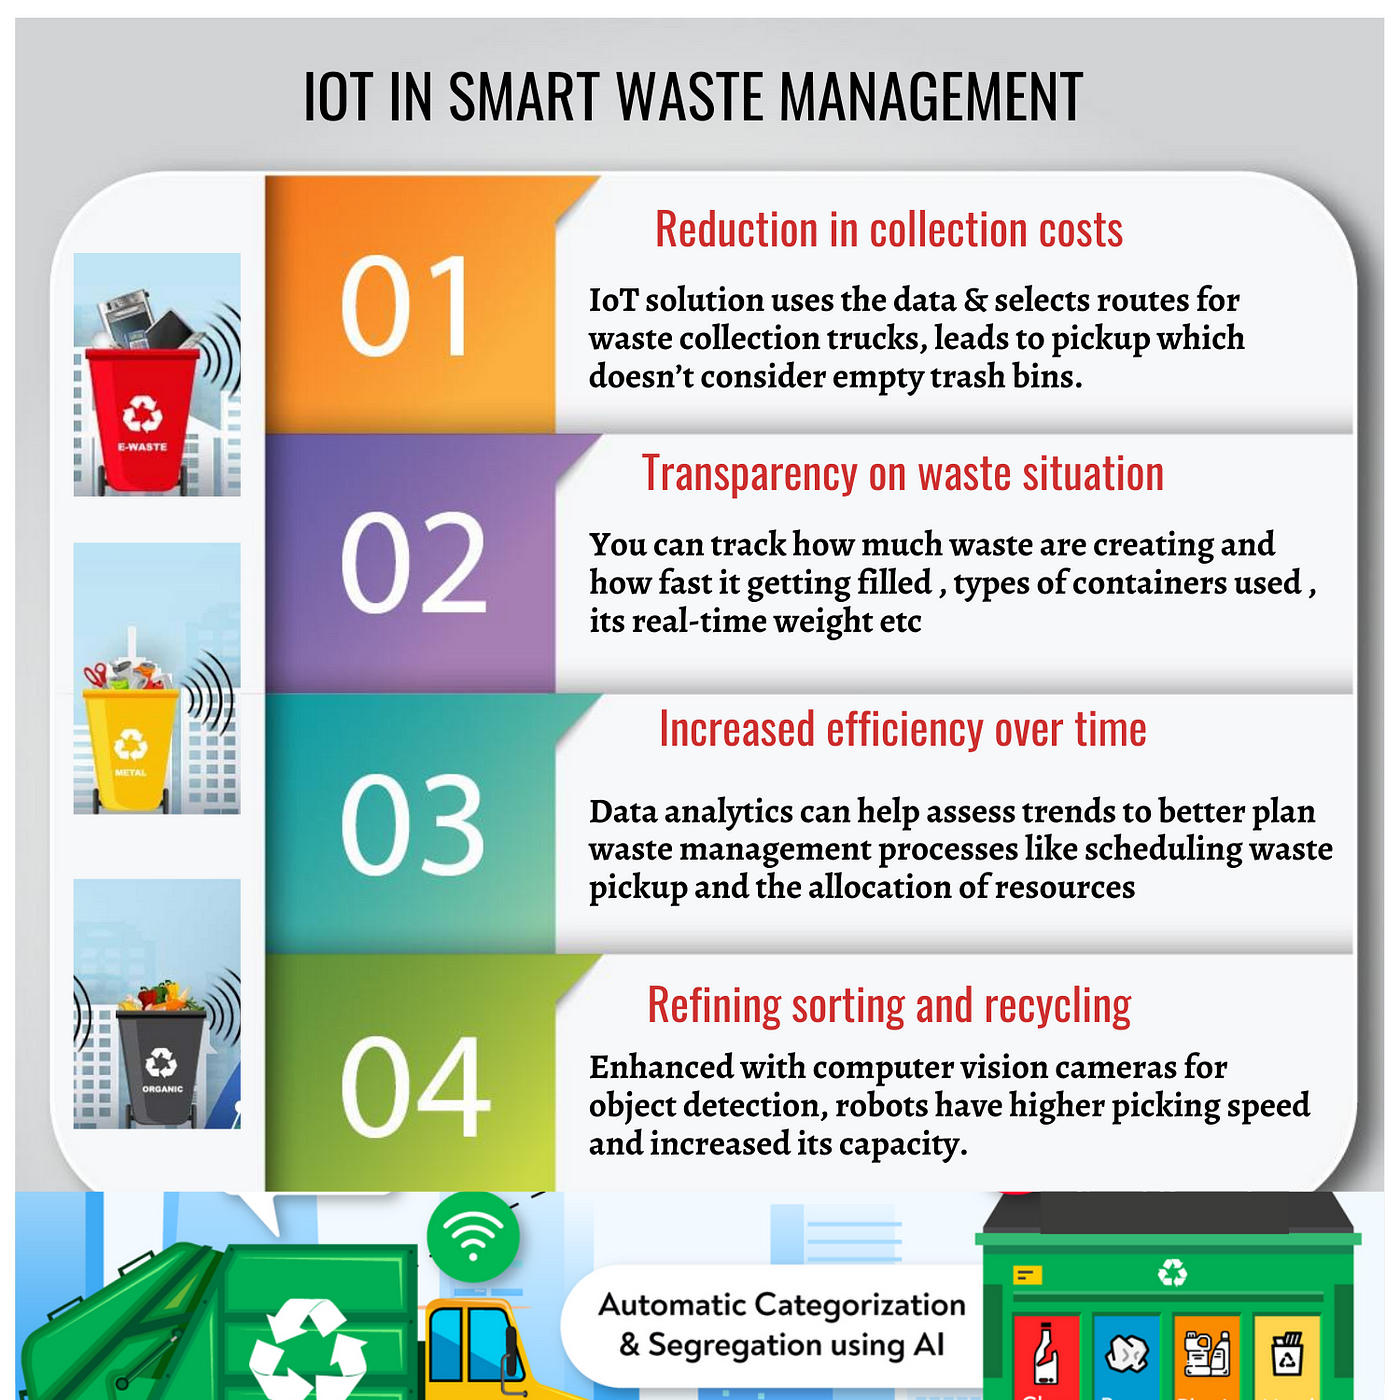 WASTE MANAGEMENT TECHNOLOGY FEATURES